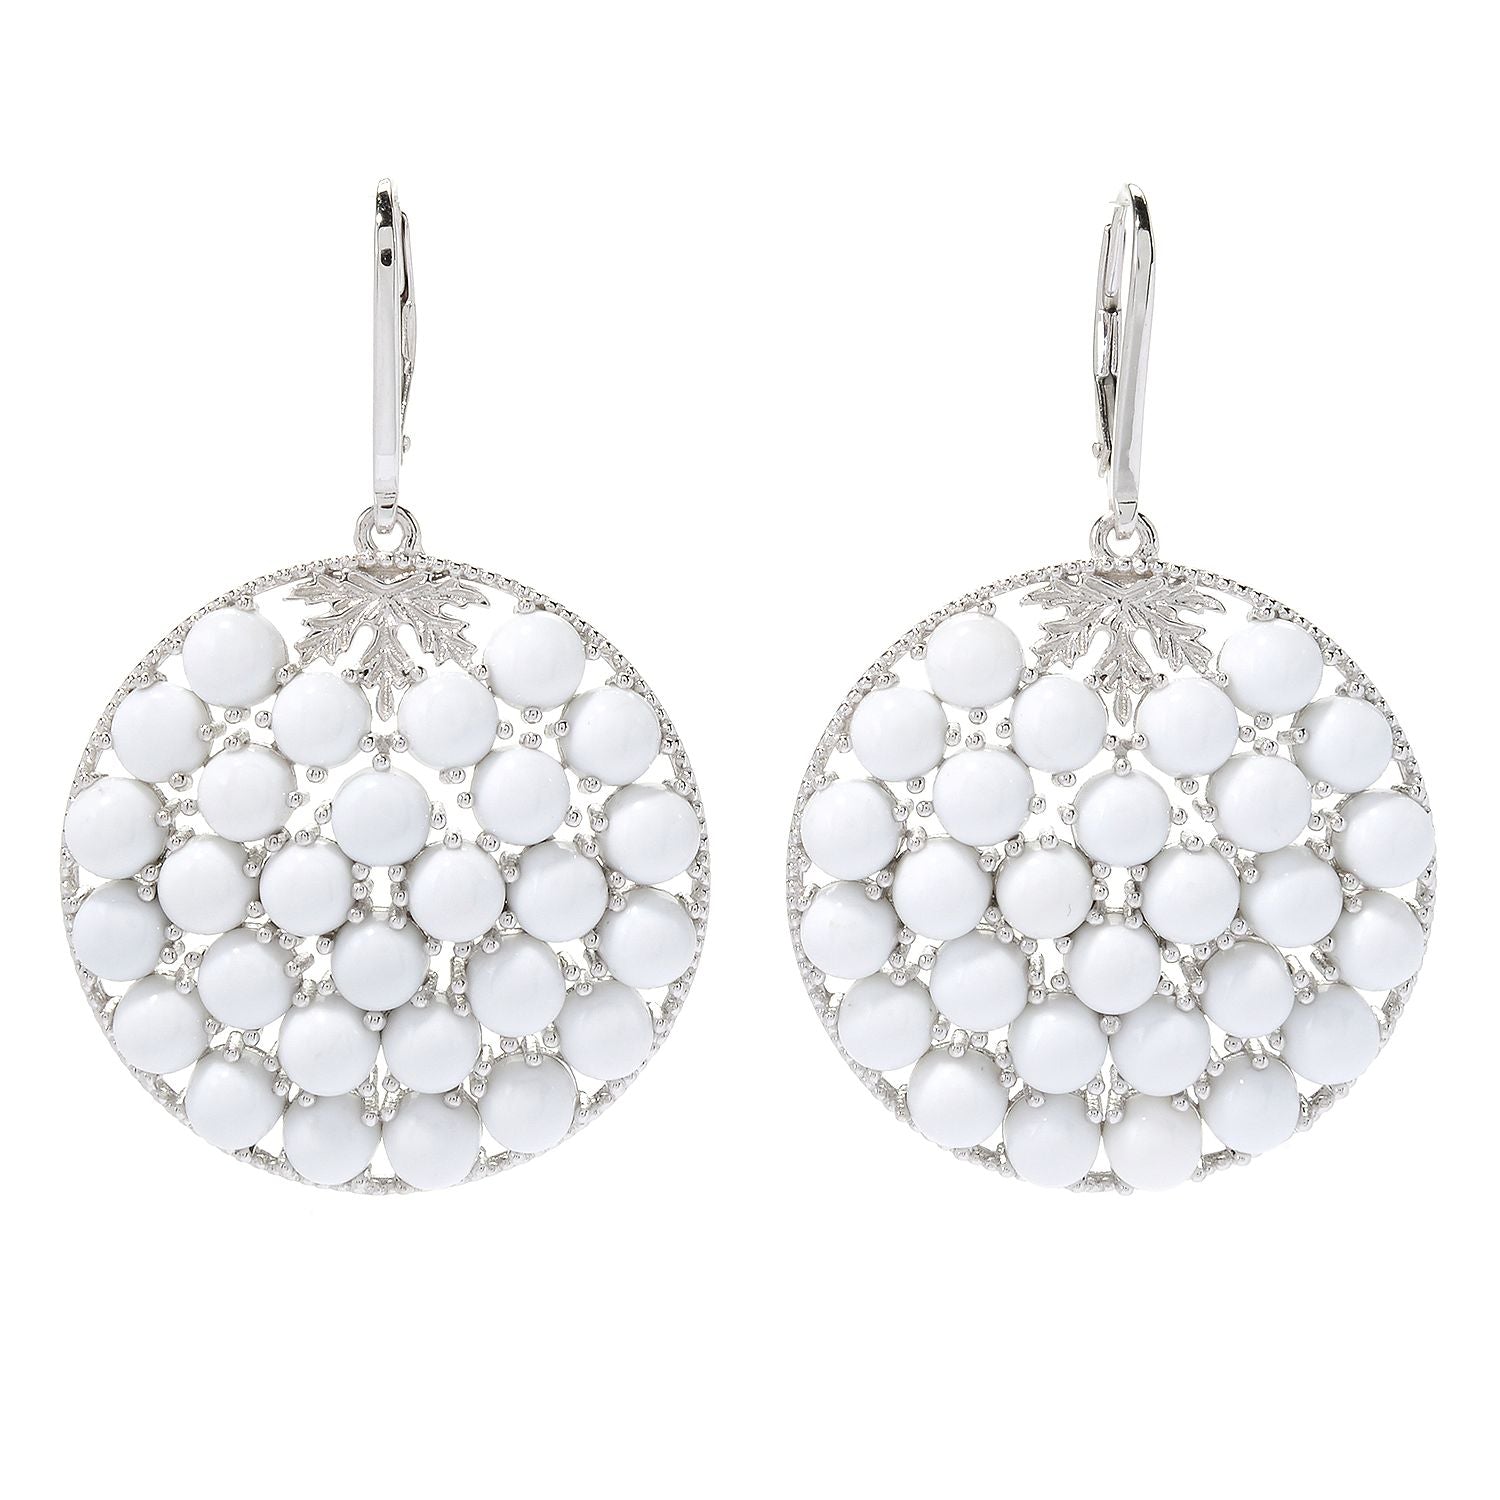 Pinctore Sterling Silver 2" White Prystine Cluster Disc Drop Earrings